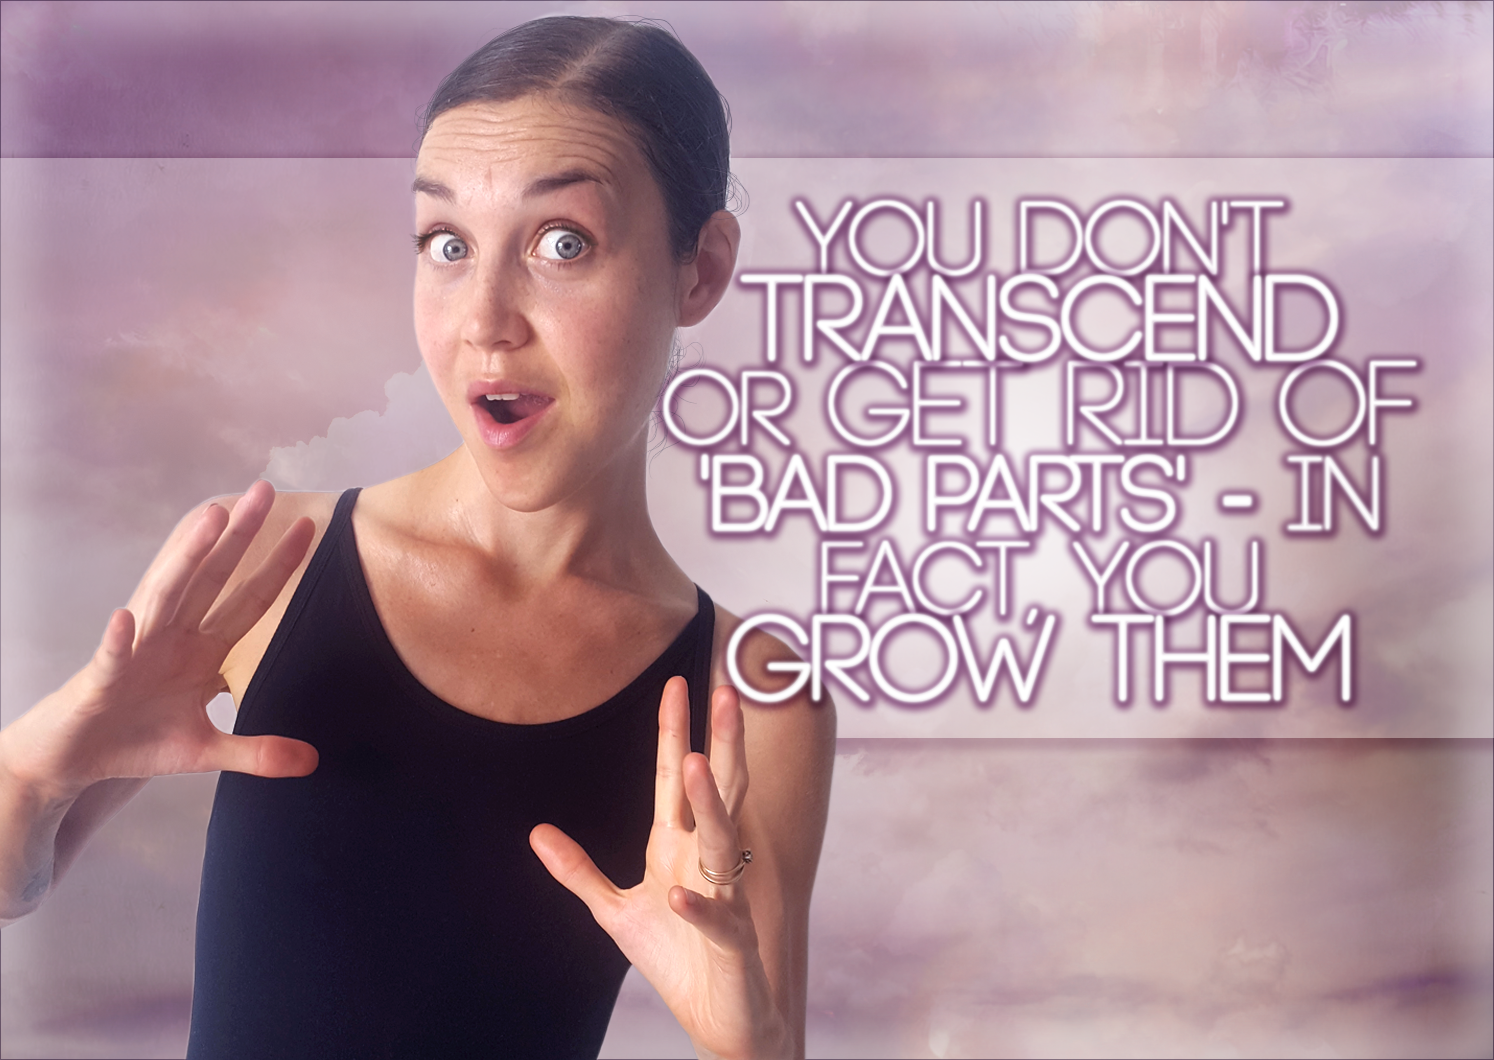 You Don’t TRANSCEND Or GET RID OF ‘Bad Parts’ – In Fact, You Grow Them